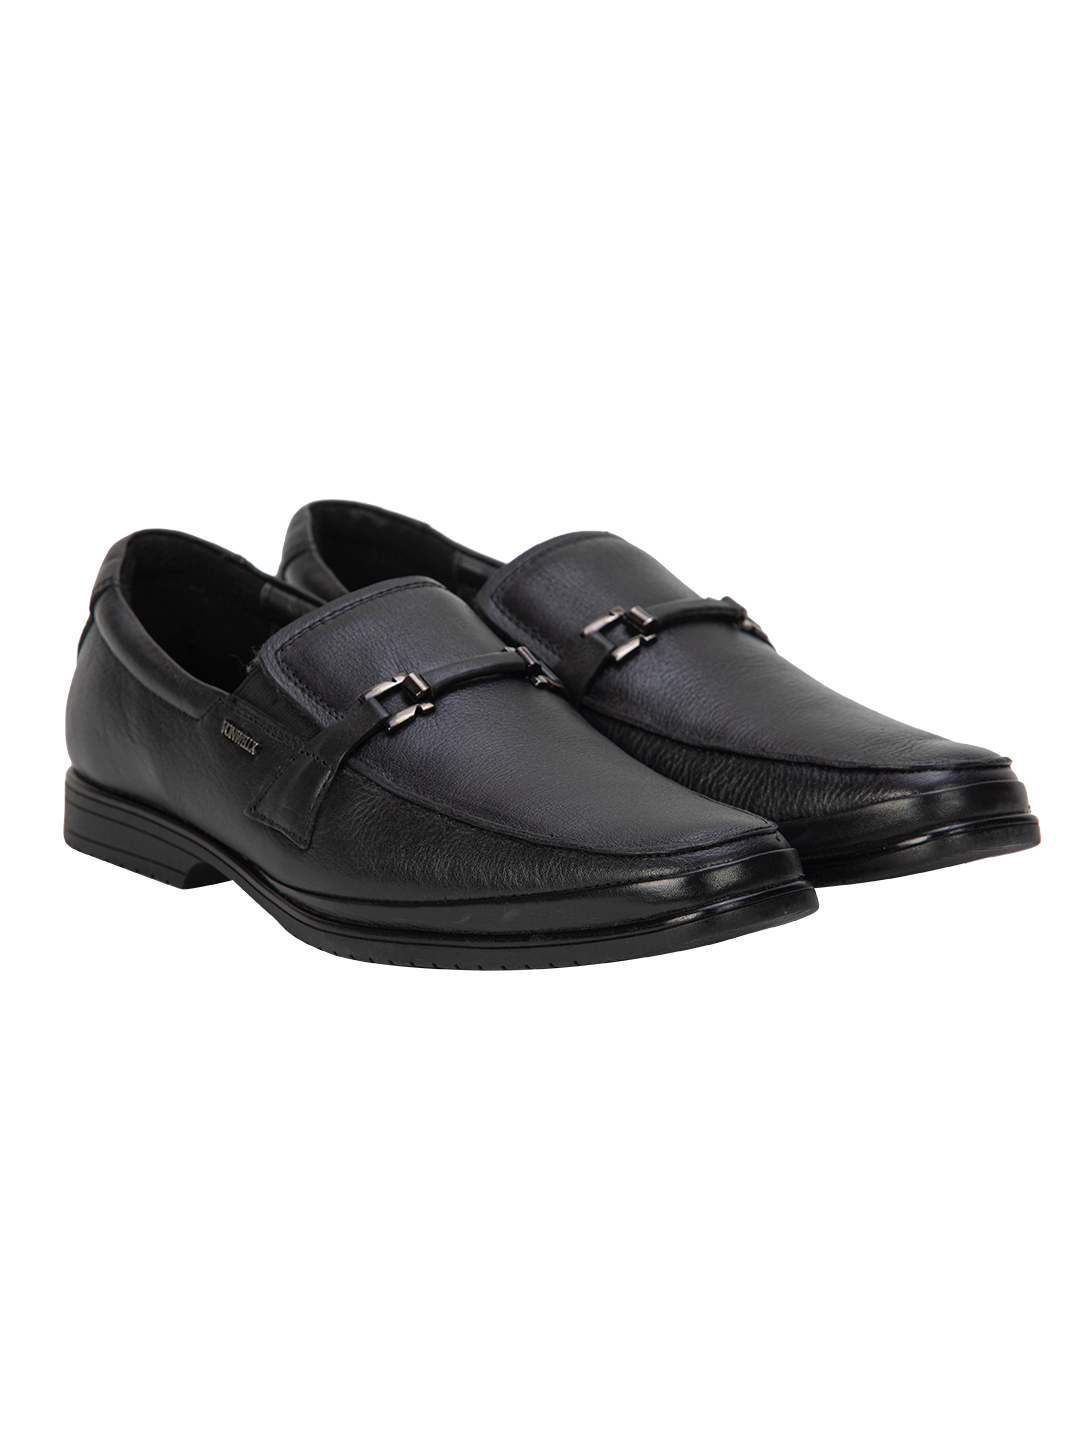 Buy Von Wellx Germany Comfort Black Jace Shoes Online in Lucknow